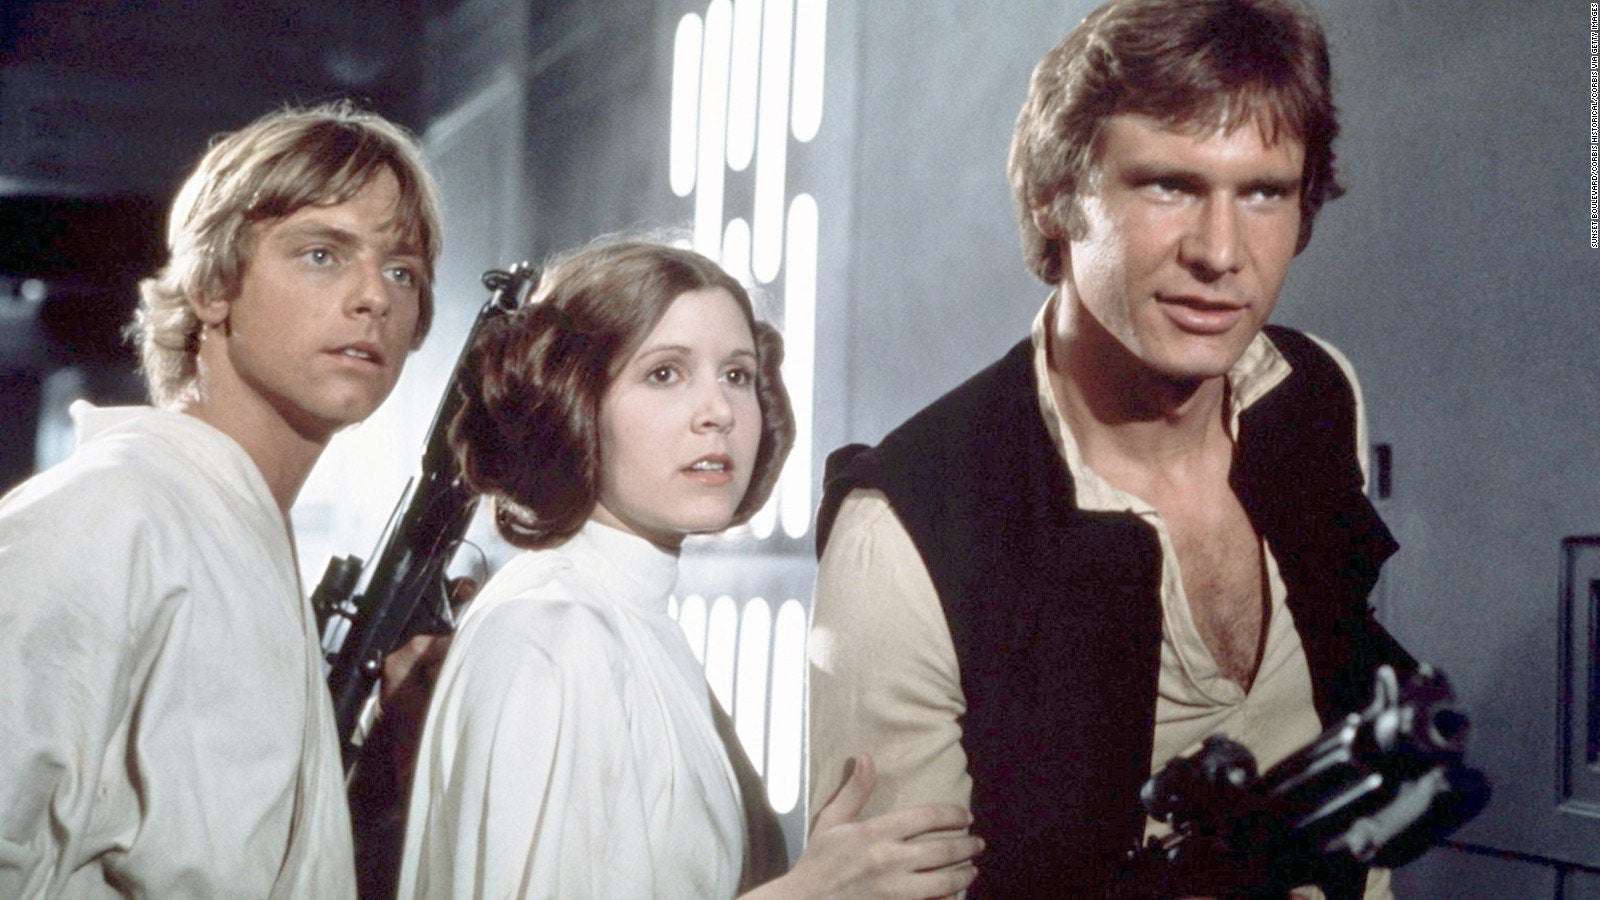 image for This Screenwriter’s Behind-the-Scenes Mark Hamill Story Will Brighten Your Day